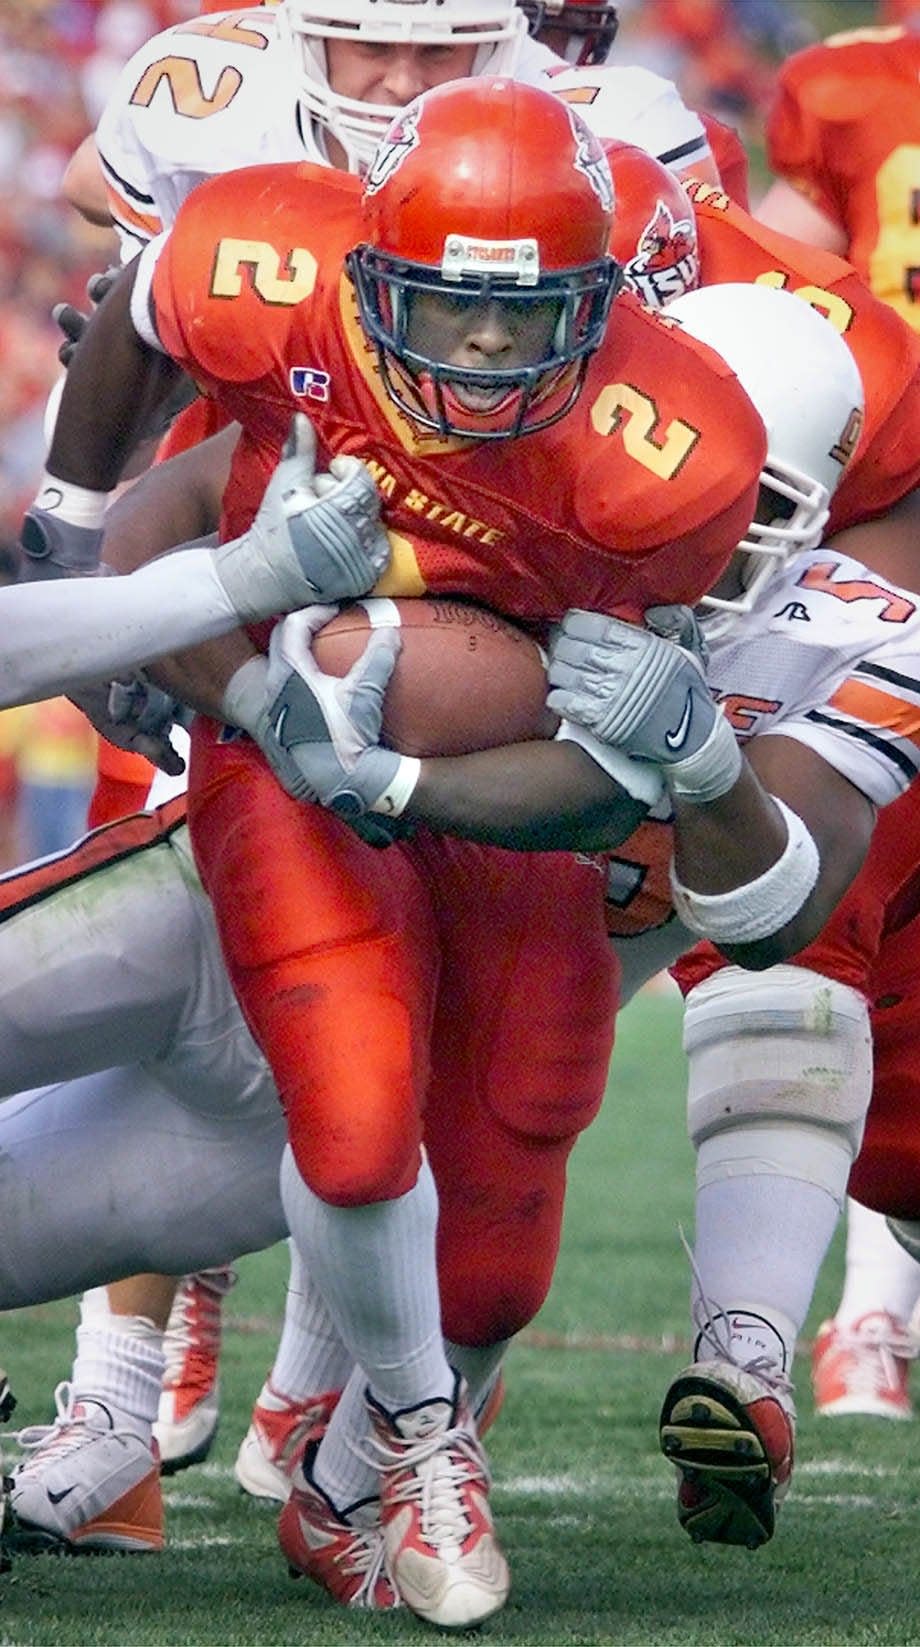 Iowa State running back Ennis Haywood racked up 219 yards rushing and two touchdowns on 33 carries against Ohio University back in 2001. It was Iowa State's first game after 9/11.